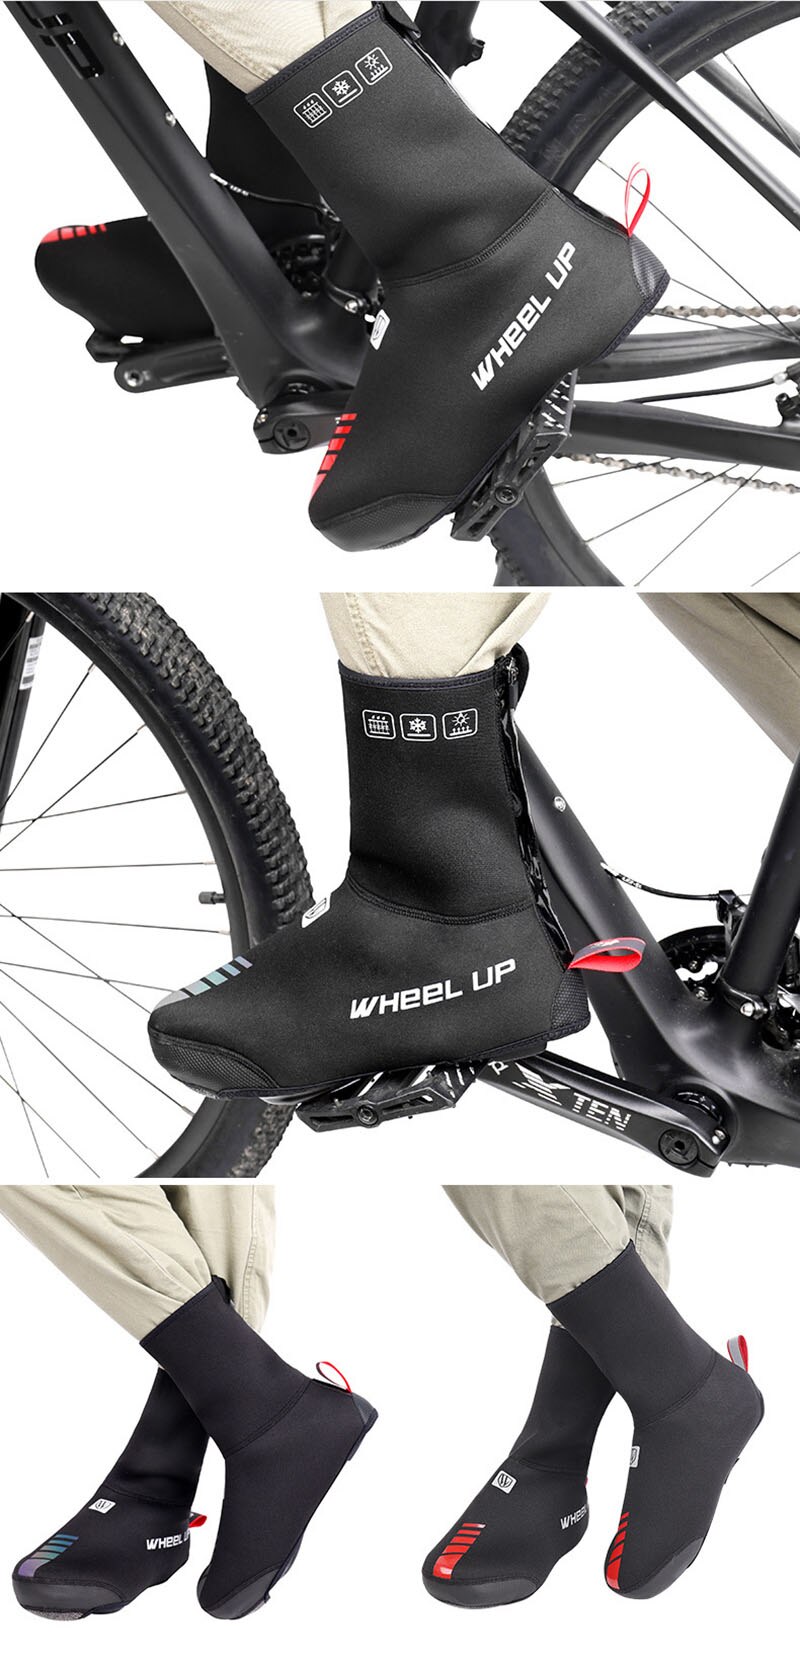 WHEEL UP Winter Waterproof Cycling Shoe Cover Reflective Bike Shoe Covers Cold-proof Warmer Bicycle Overshoes Boot Covers